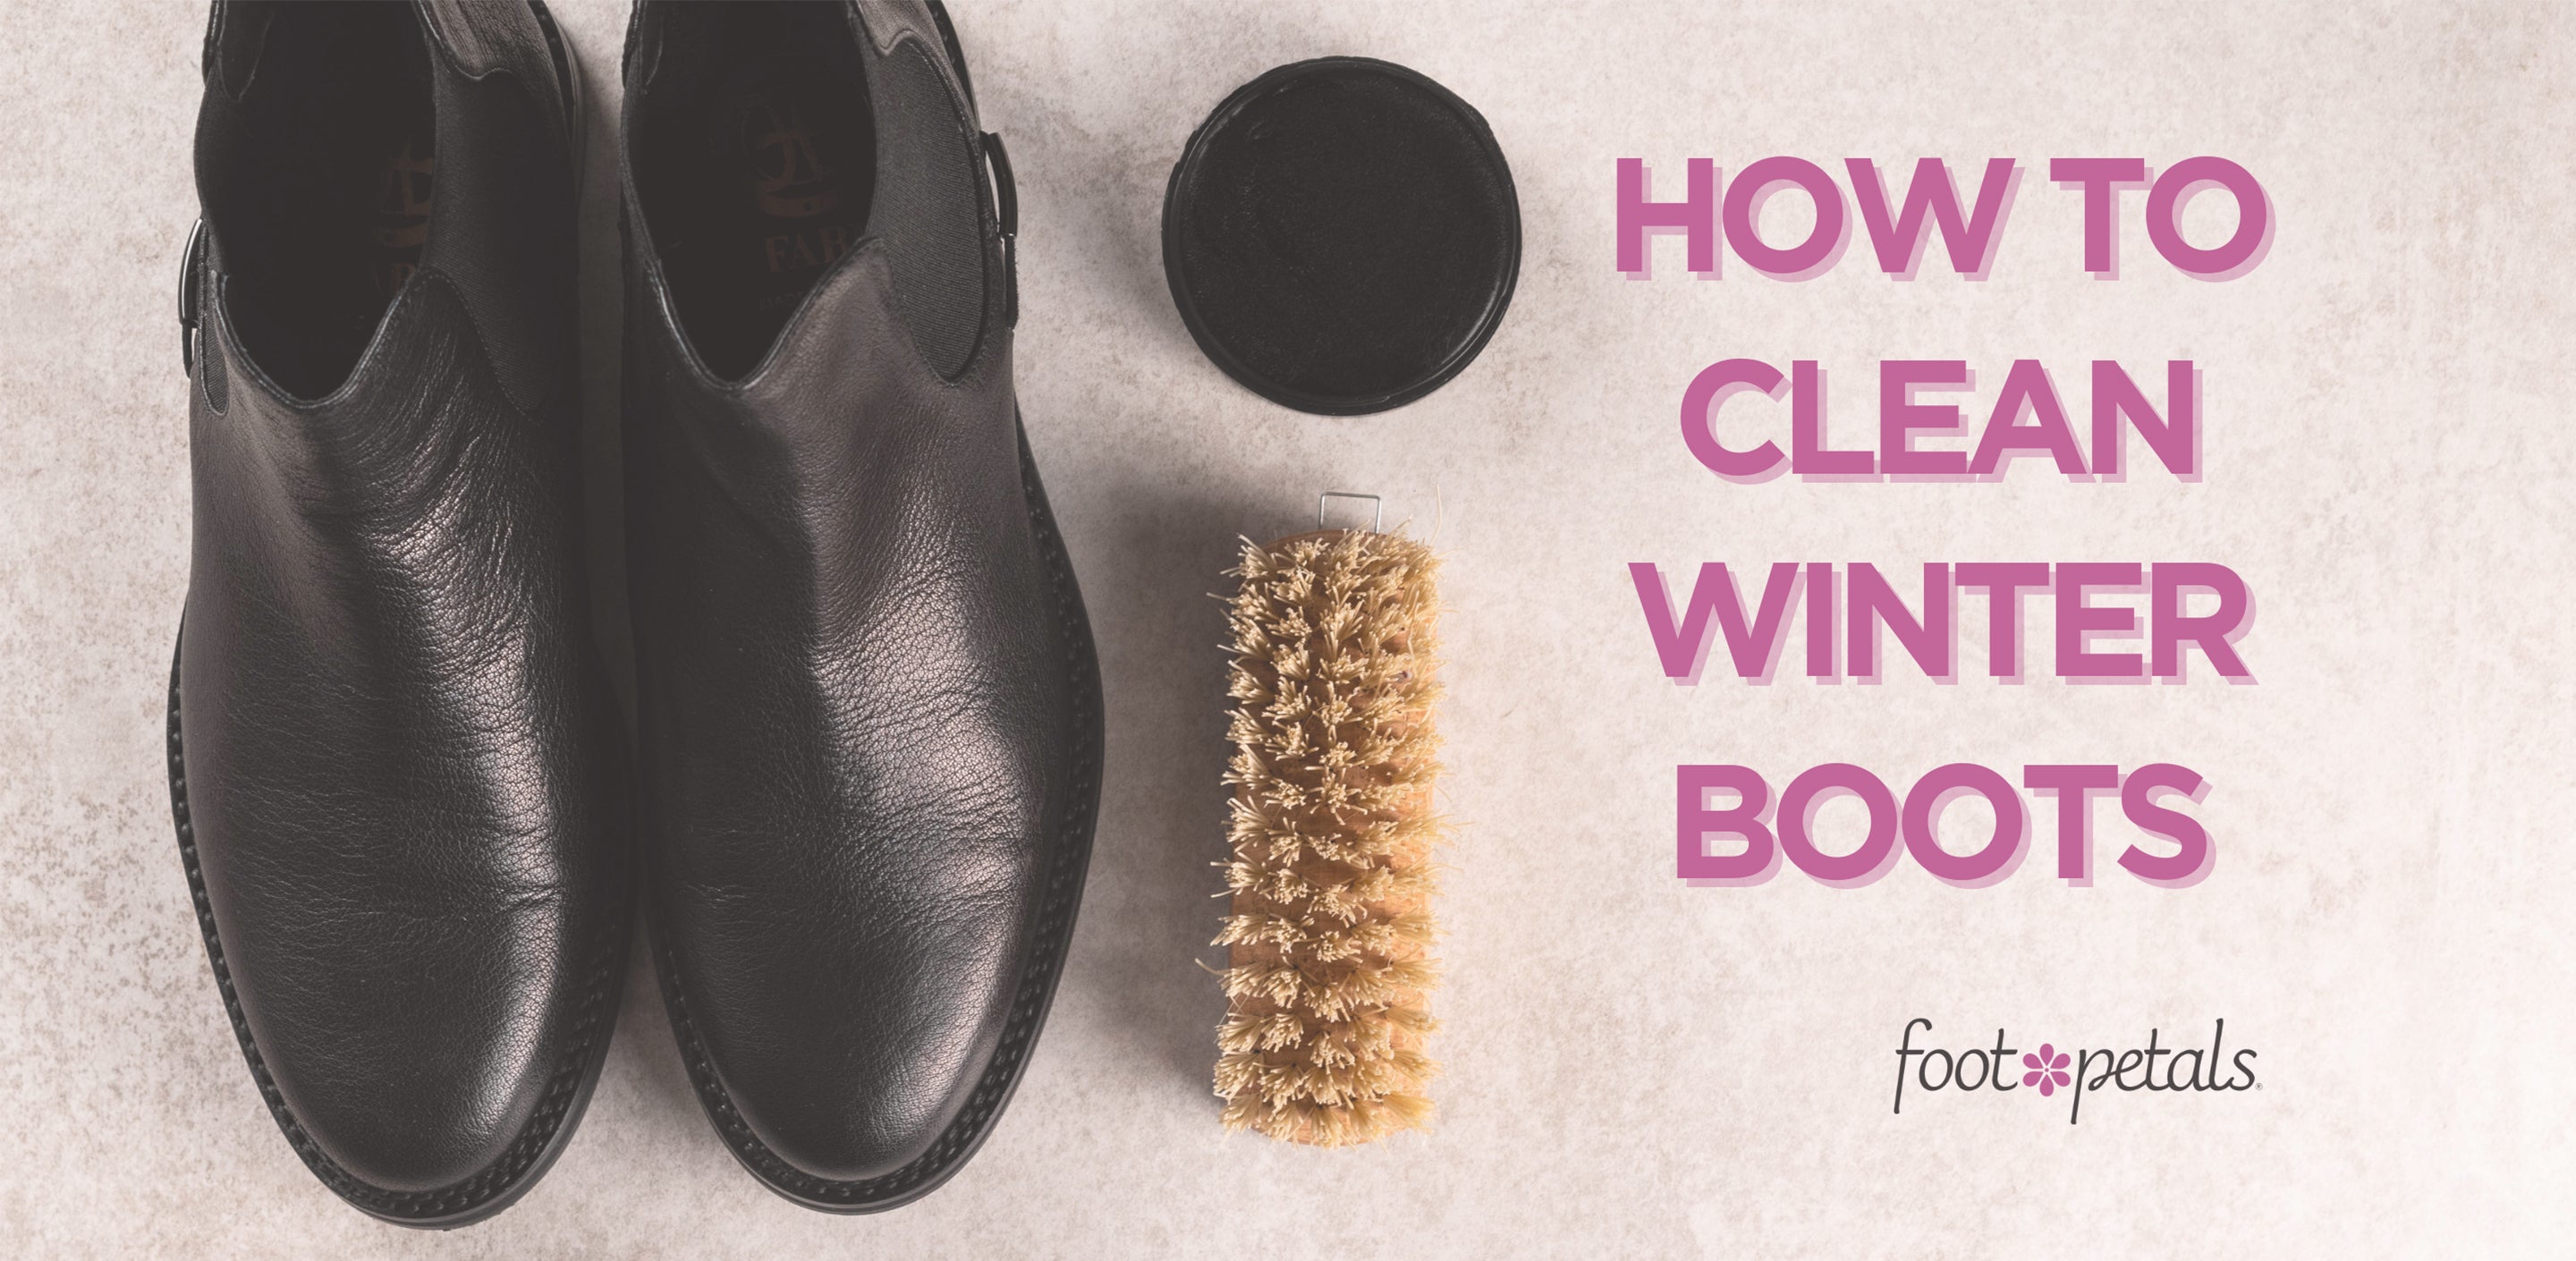 How To Clean Patent Leather Shoes Without Ruining Them